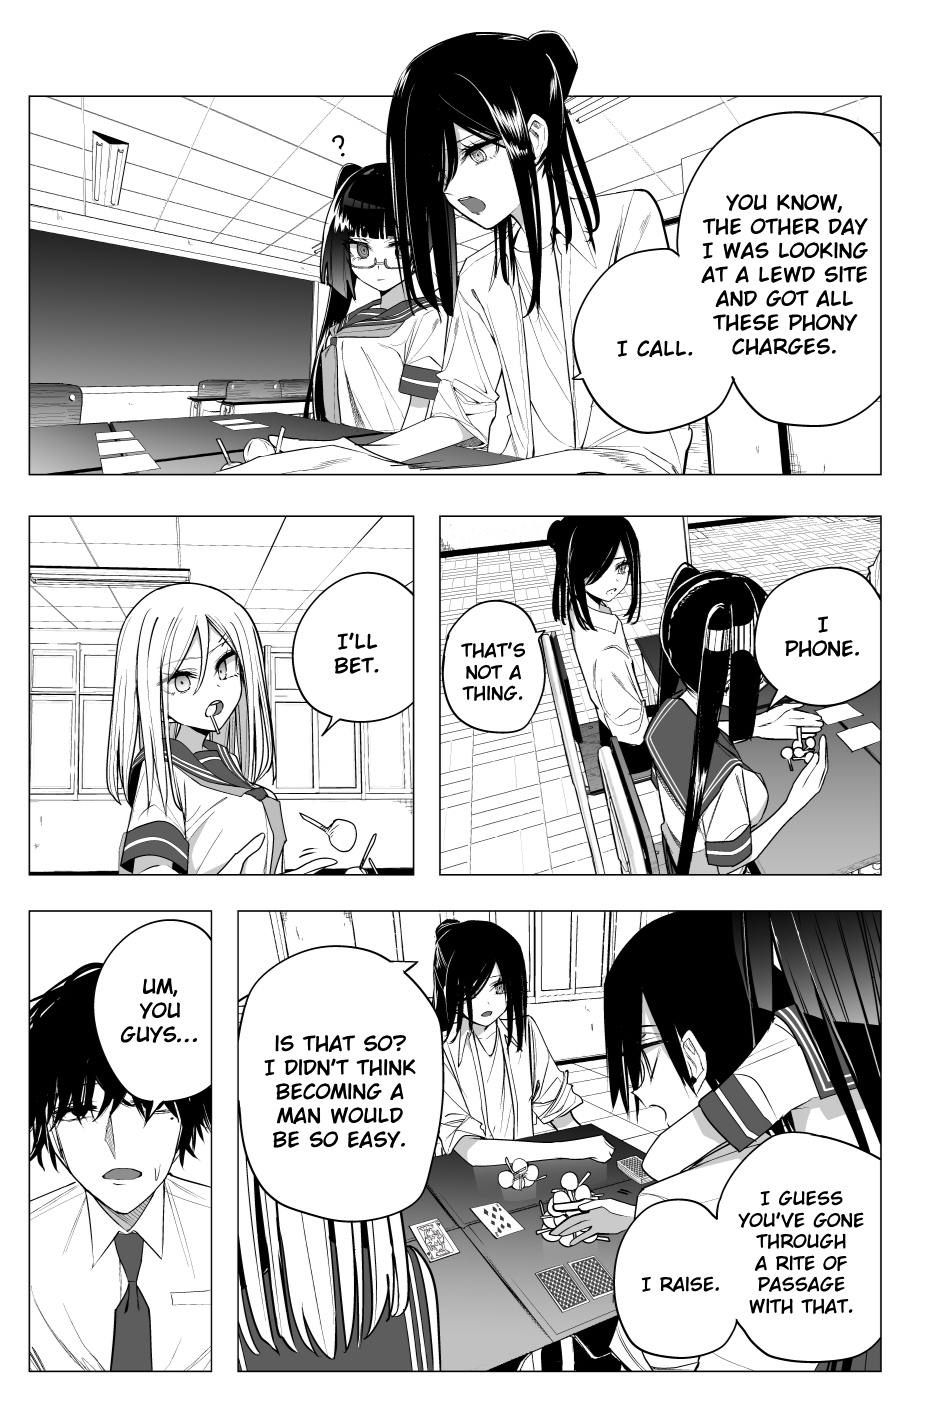 Mitsuishi-San Is Being Weird This Year - Page 2